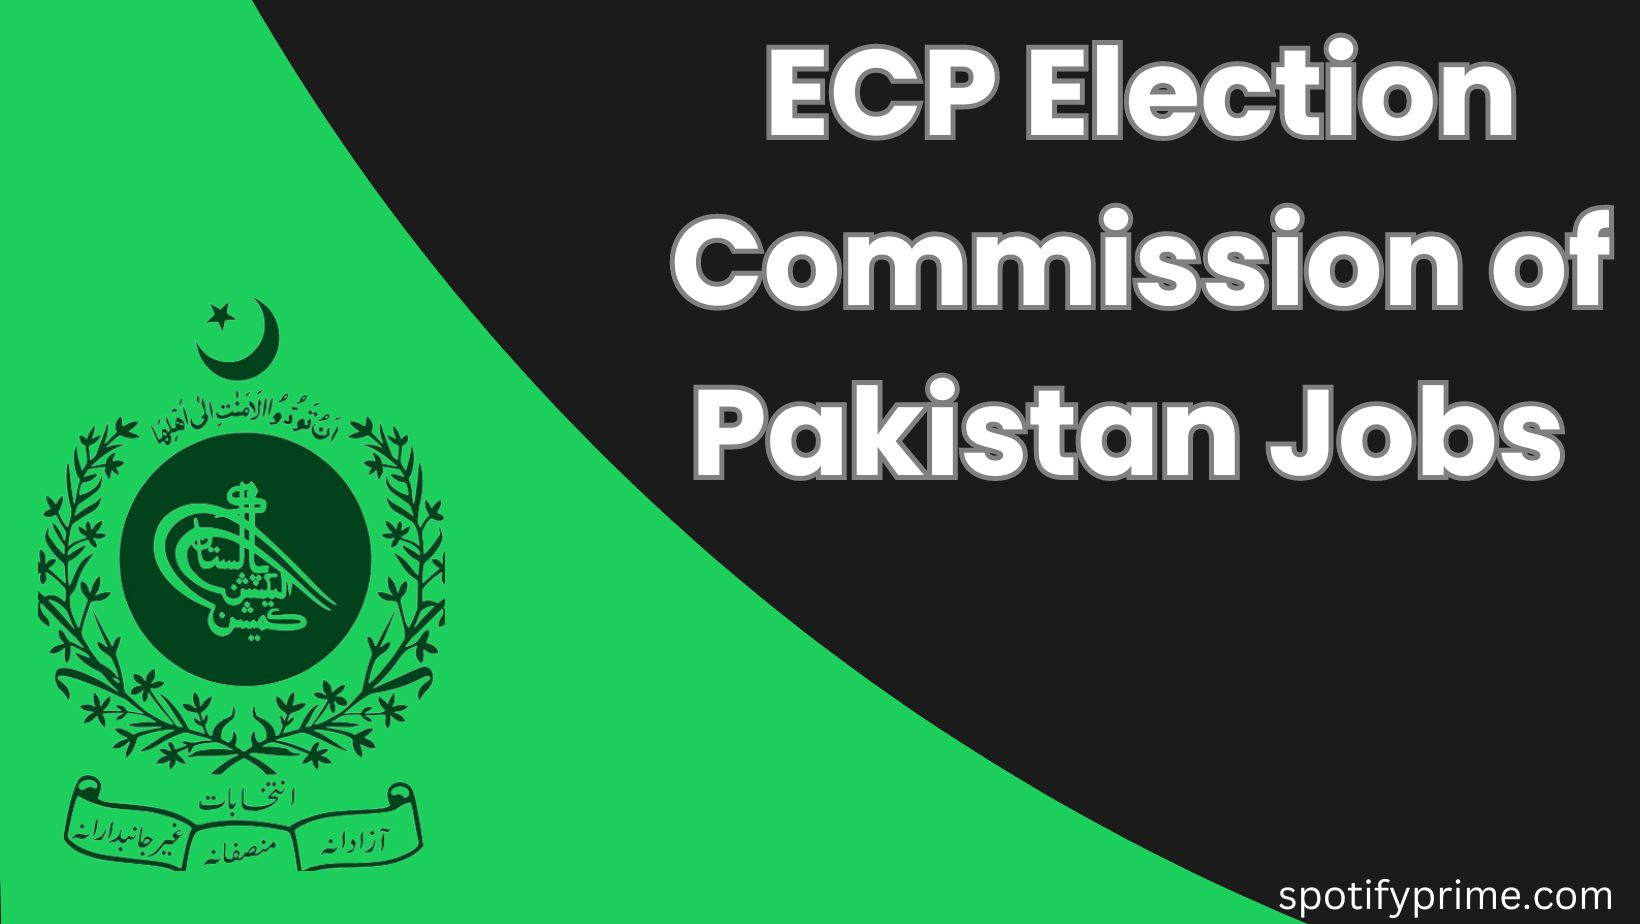 ECP Election Commission of Pakistan Jobs